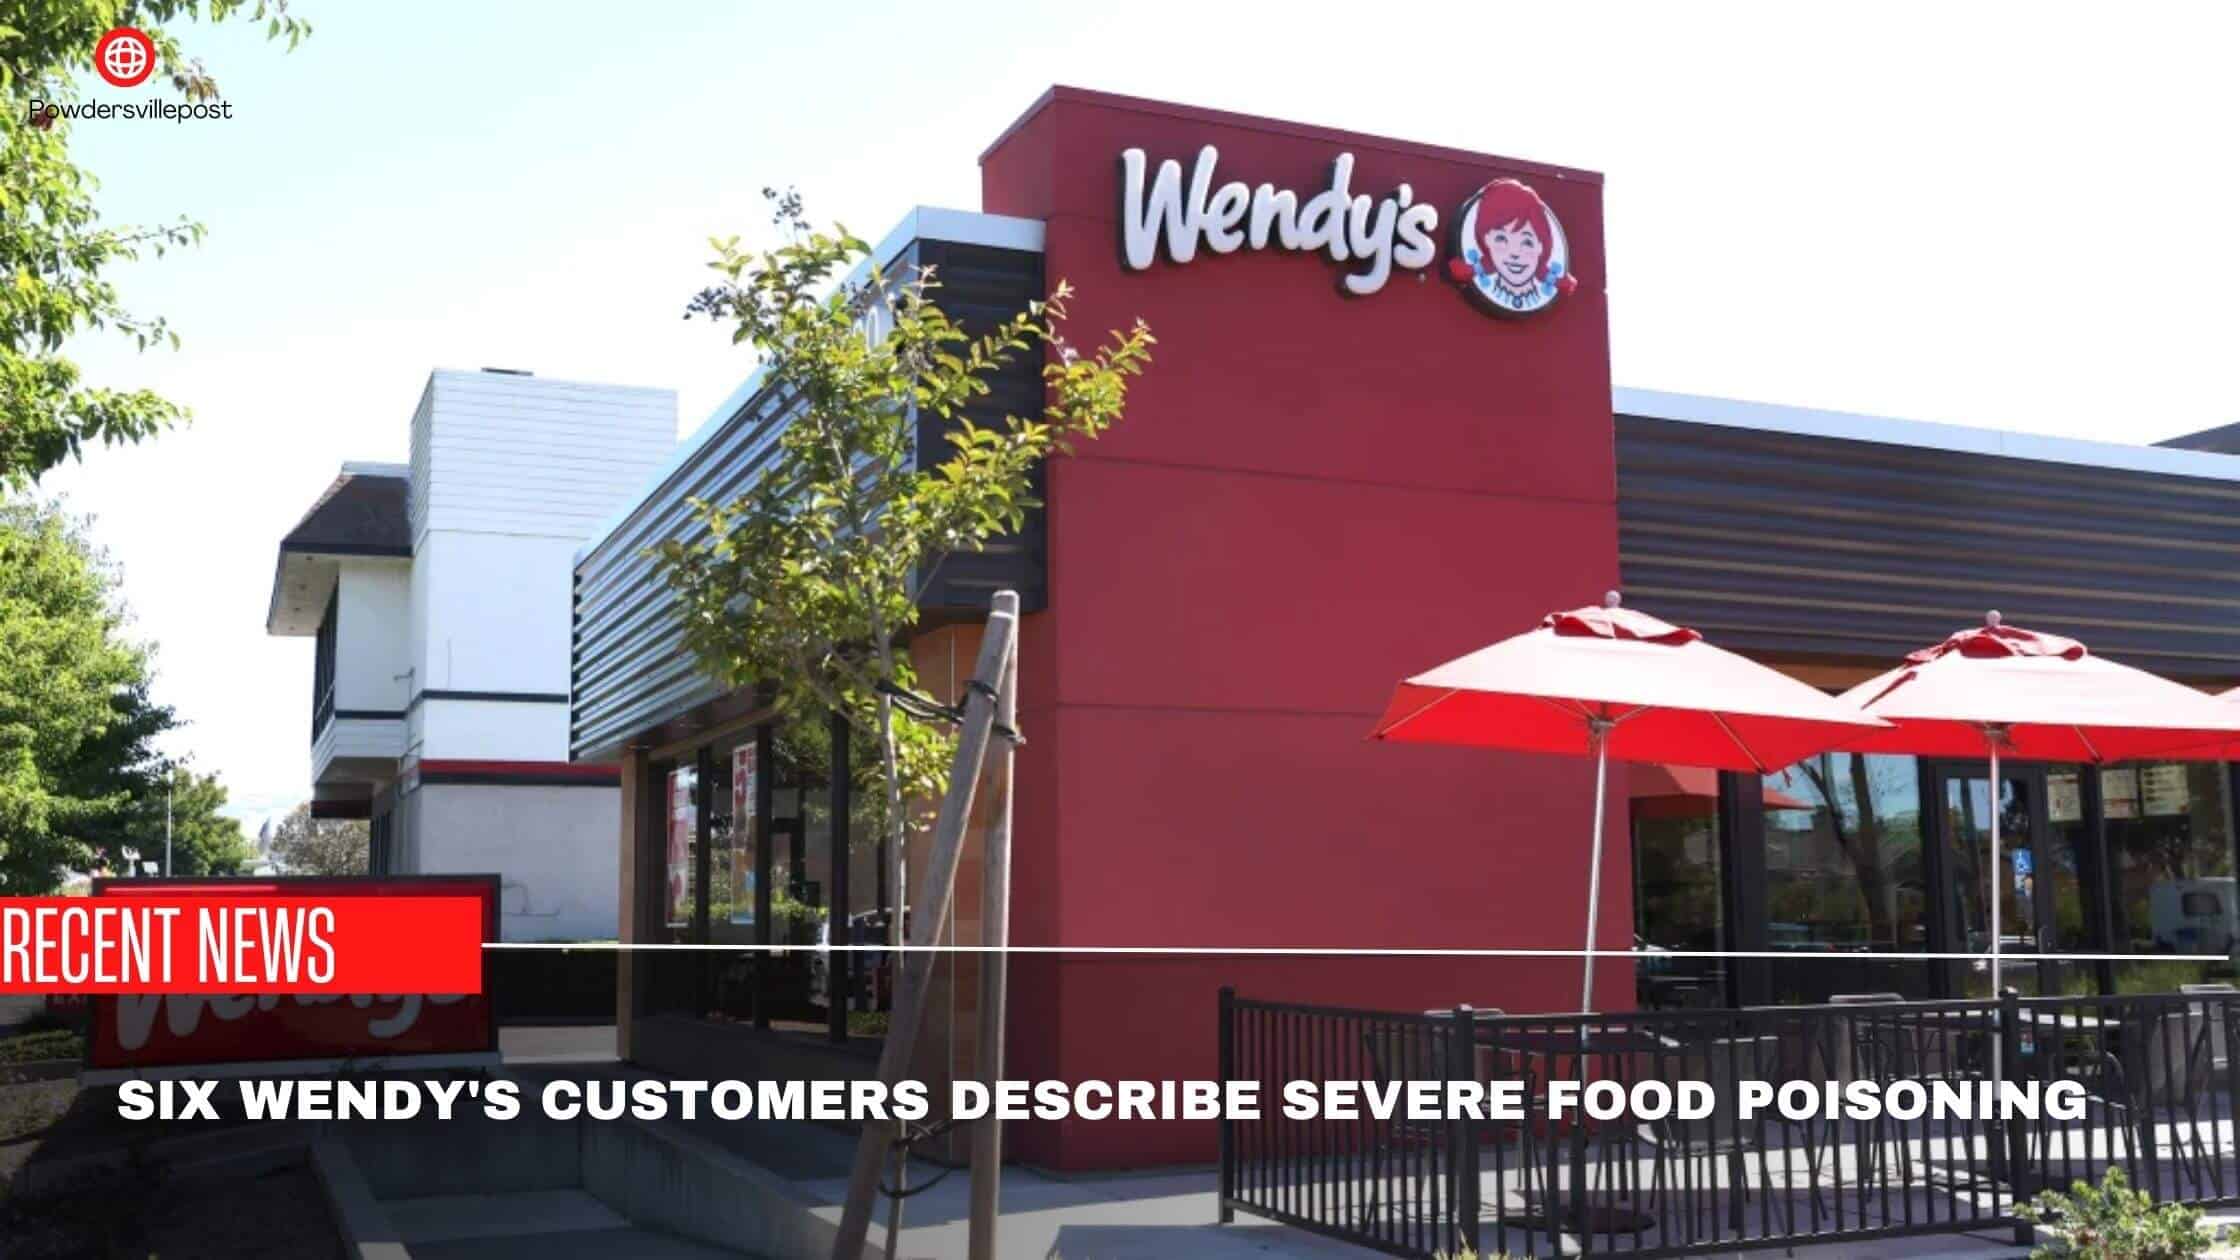 Six Wendy's Customers Describe Severe Food Poisoning - CDC Reports